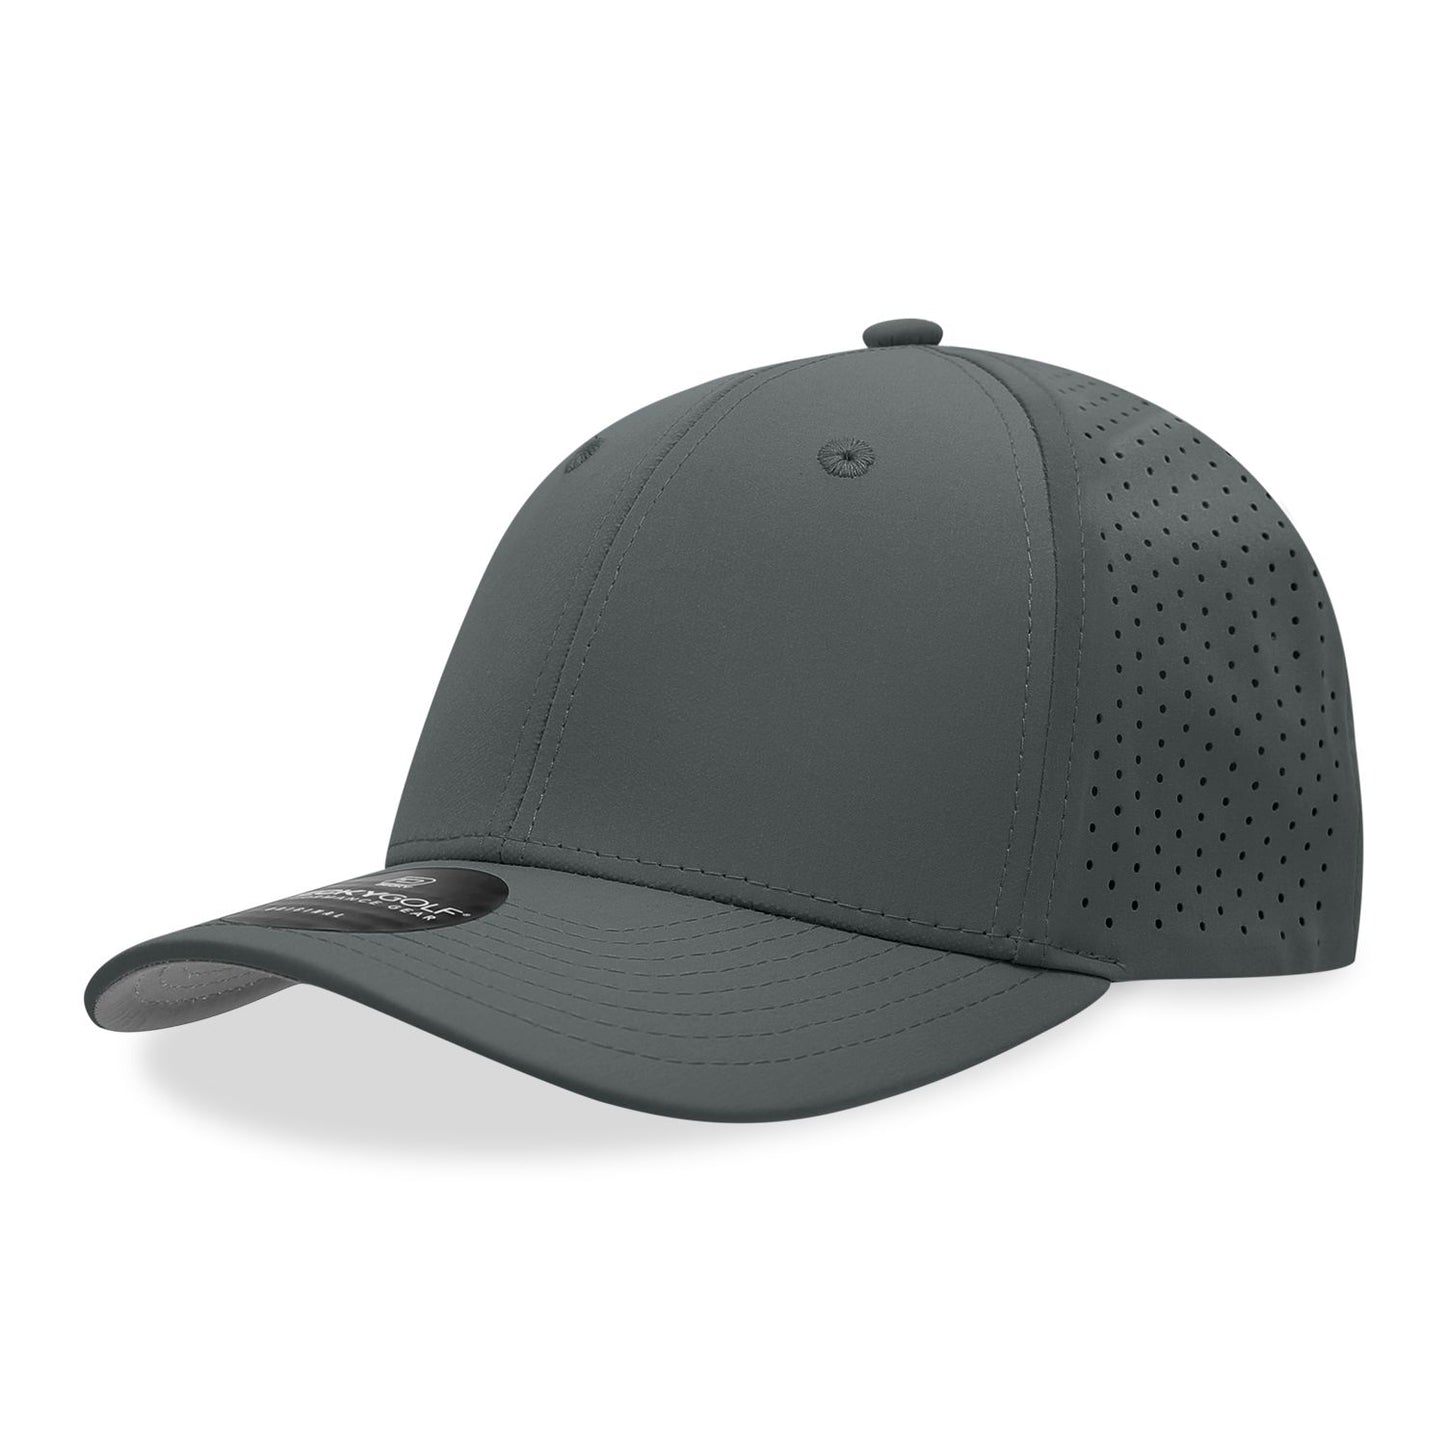 Decky 6412 6 Panel Mid Prof Perforated Cap - Blank